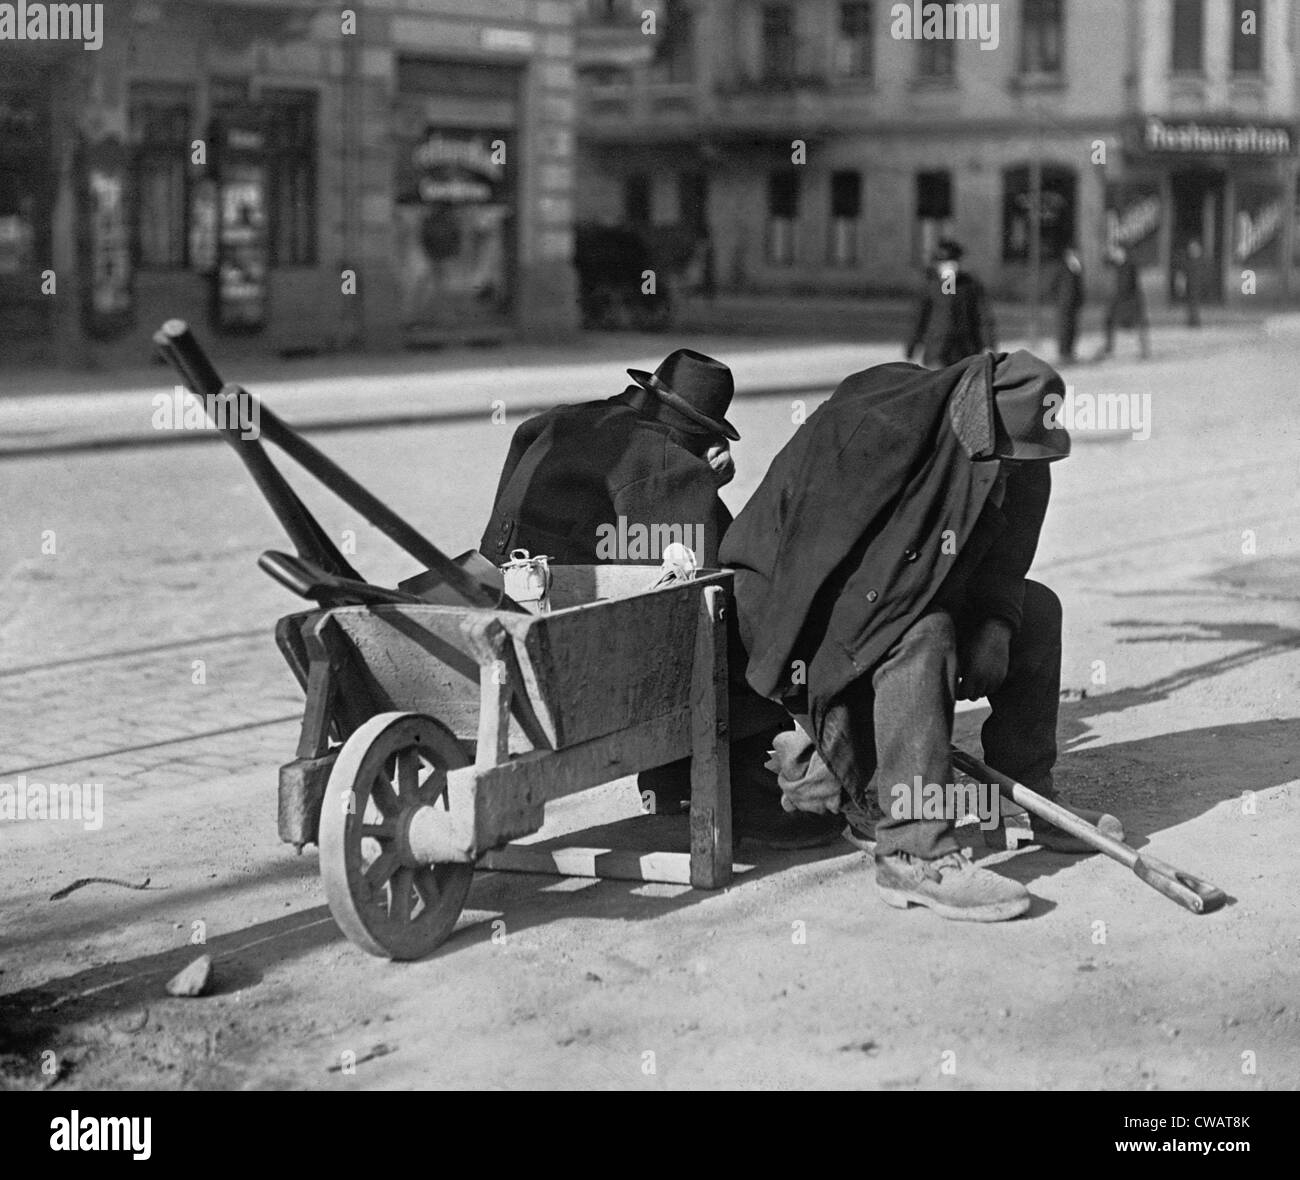 German street sweepers taking lunchtime nap.  Wartime and defeat took a terrible economic toll on Germany. Ca. 1919. Stock Photo